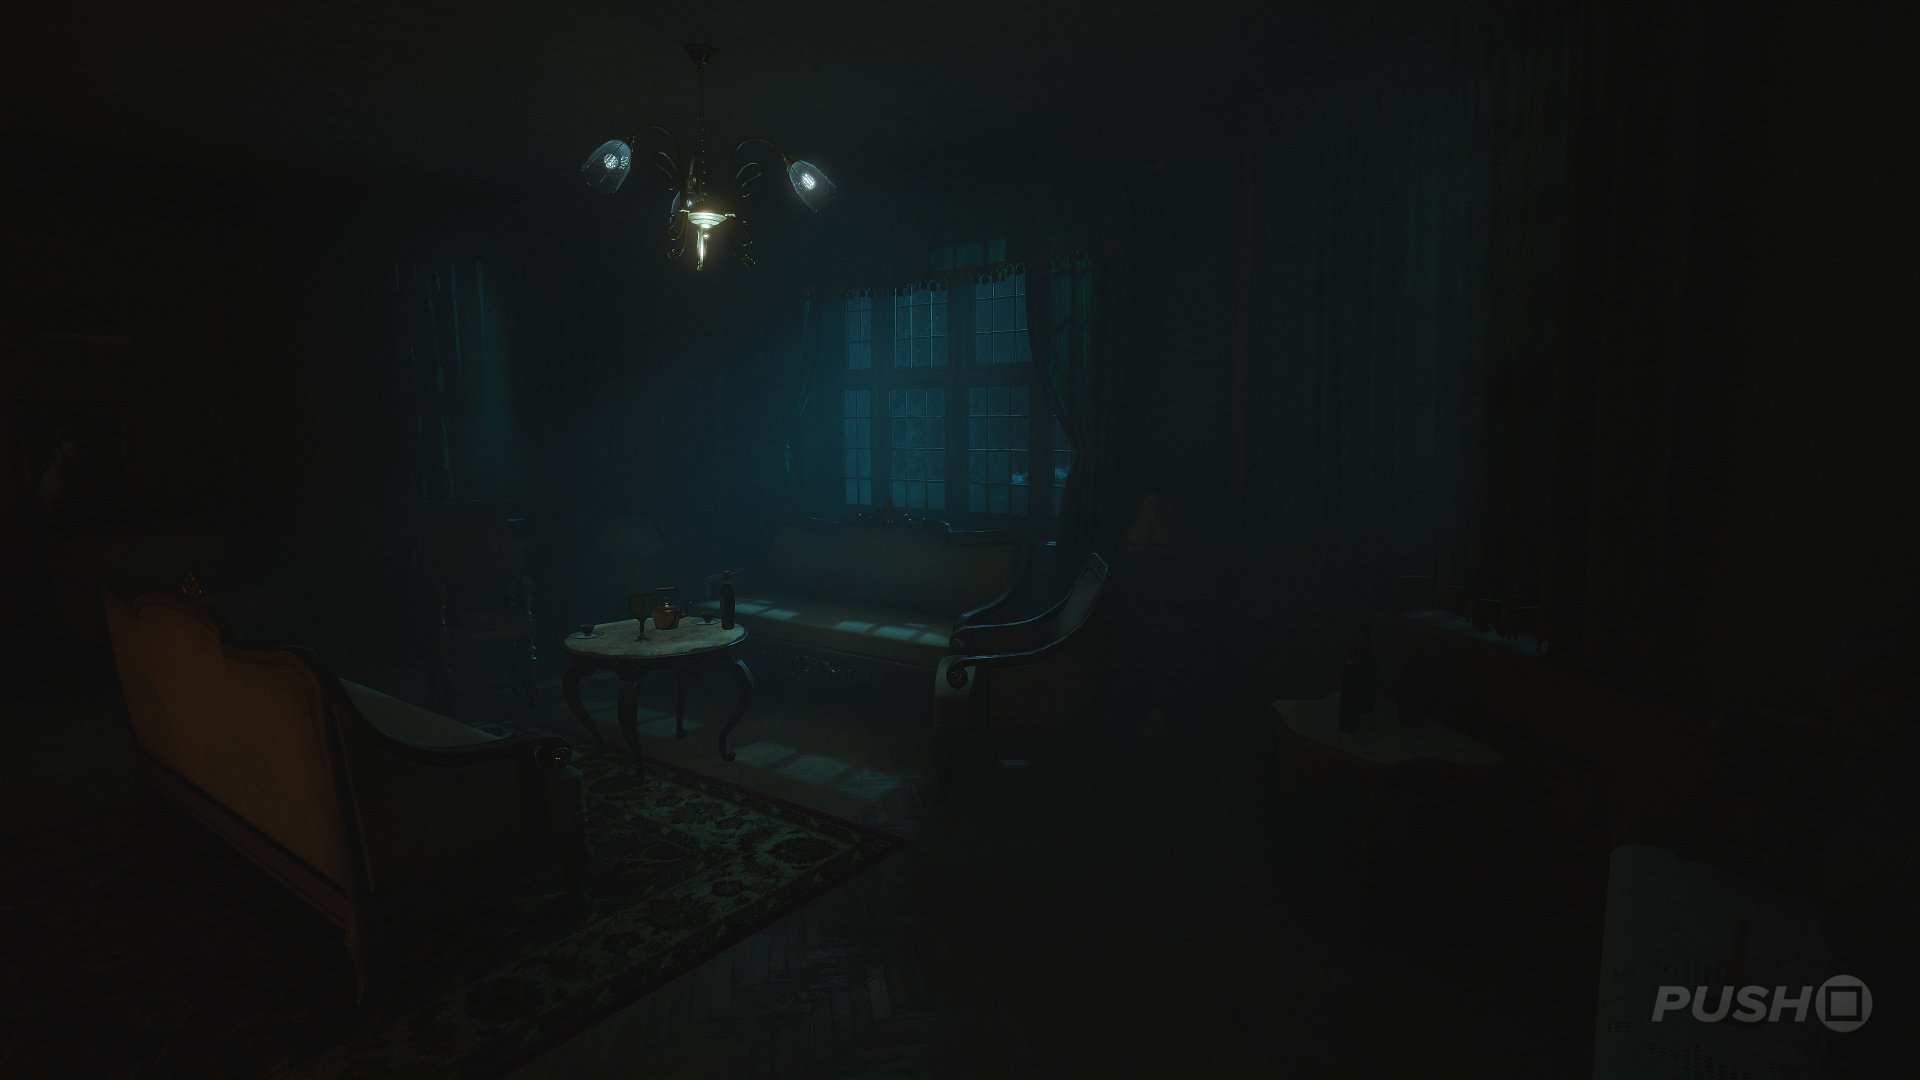 Second Look Review: The Medium (PS5) - Rely on Horror